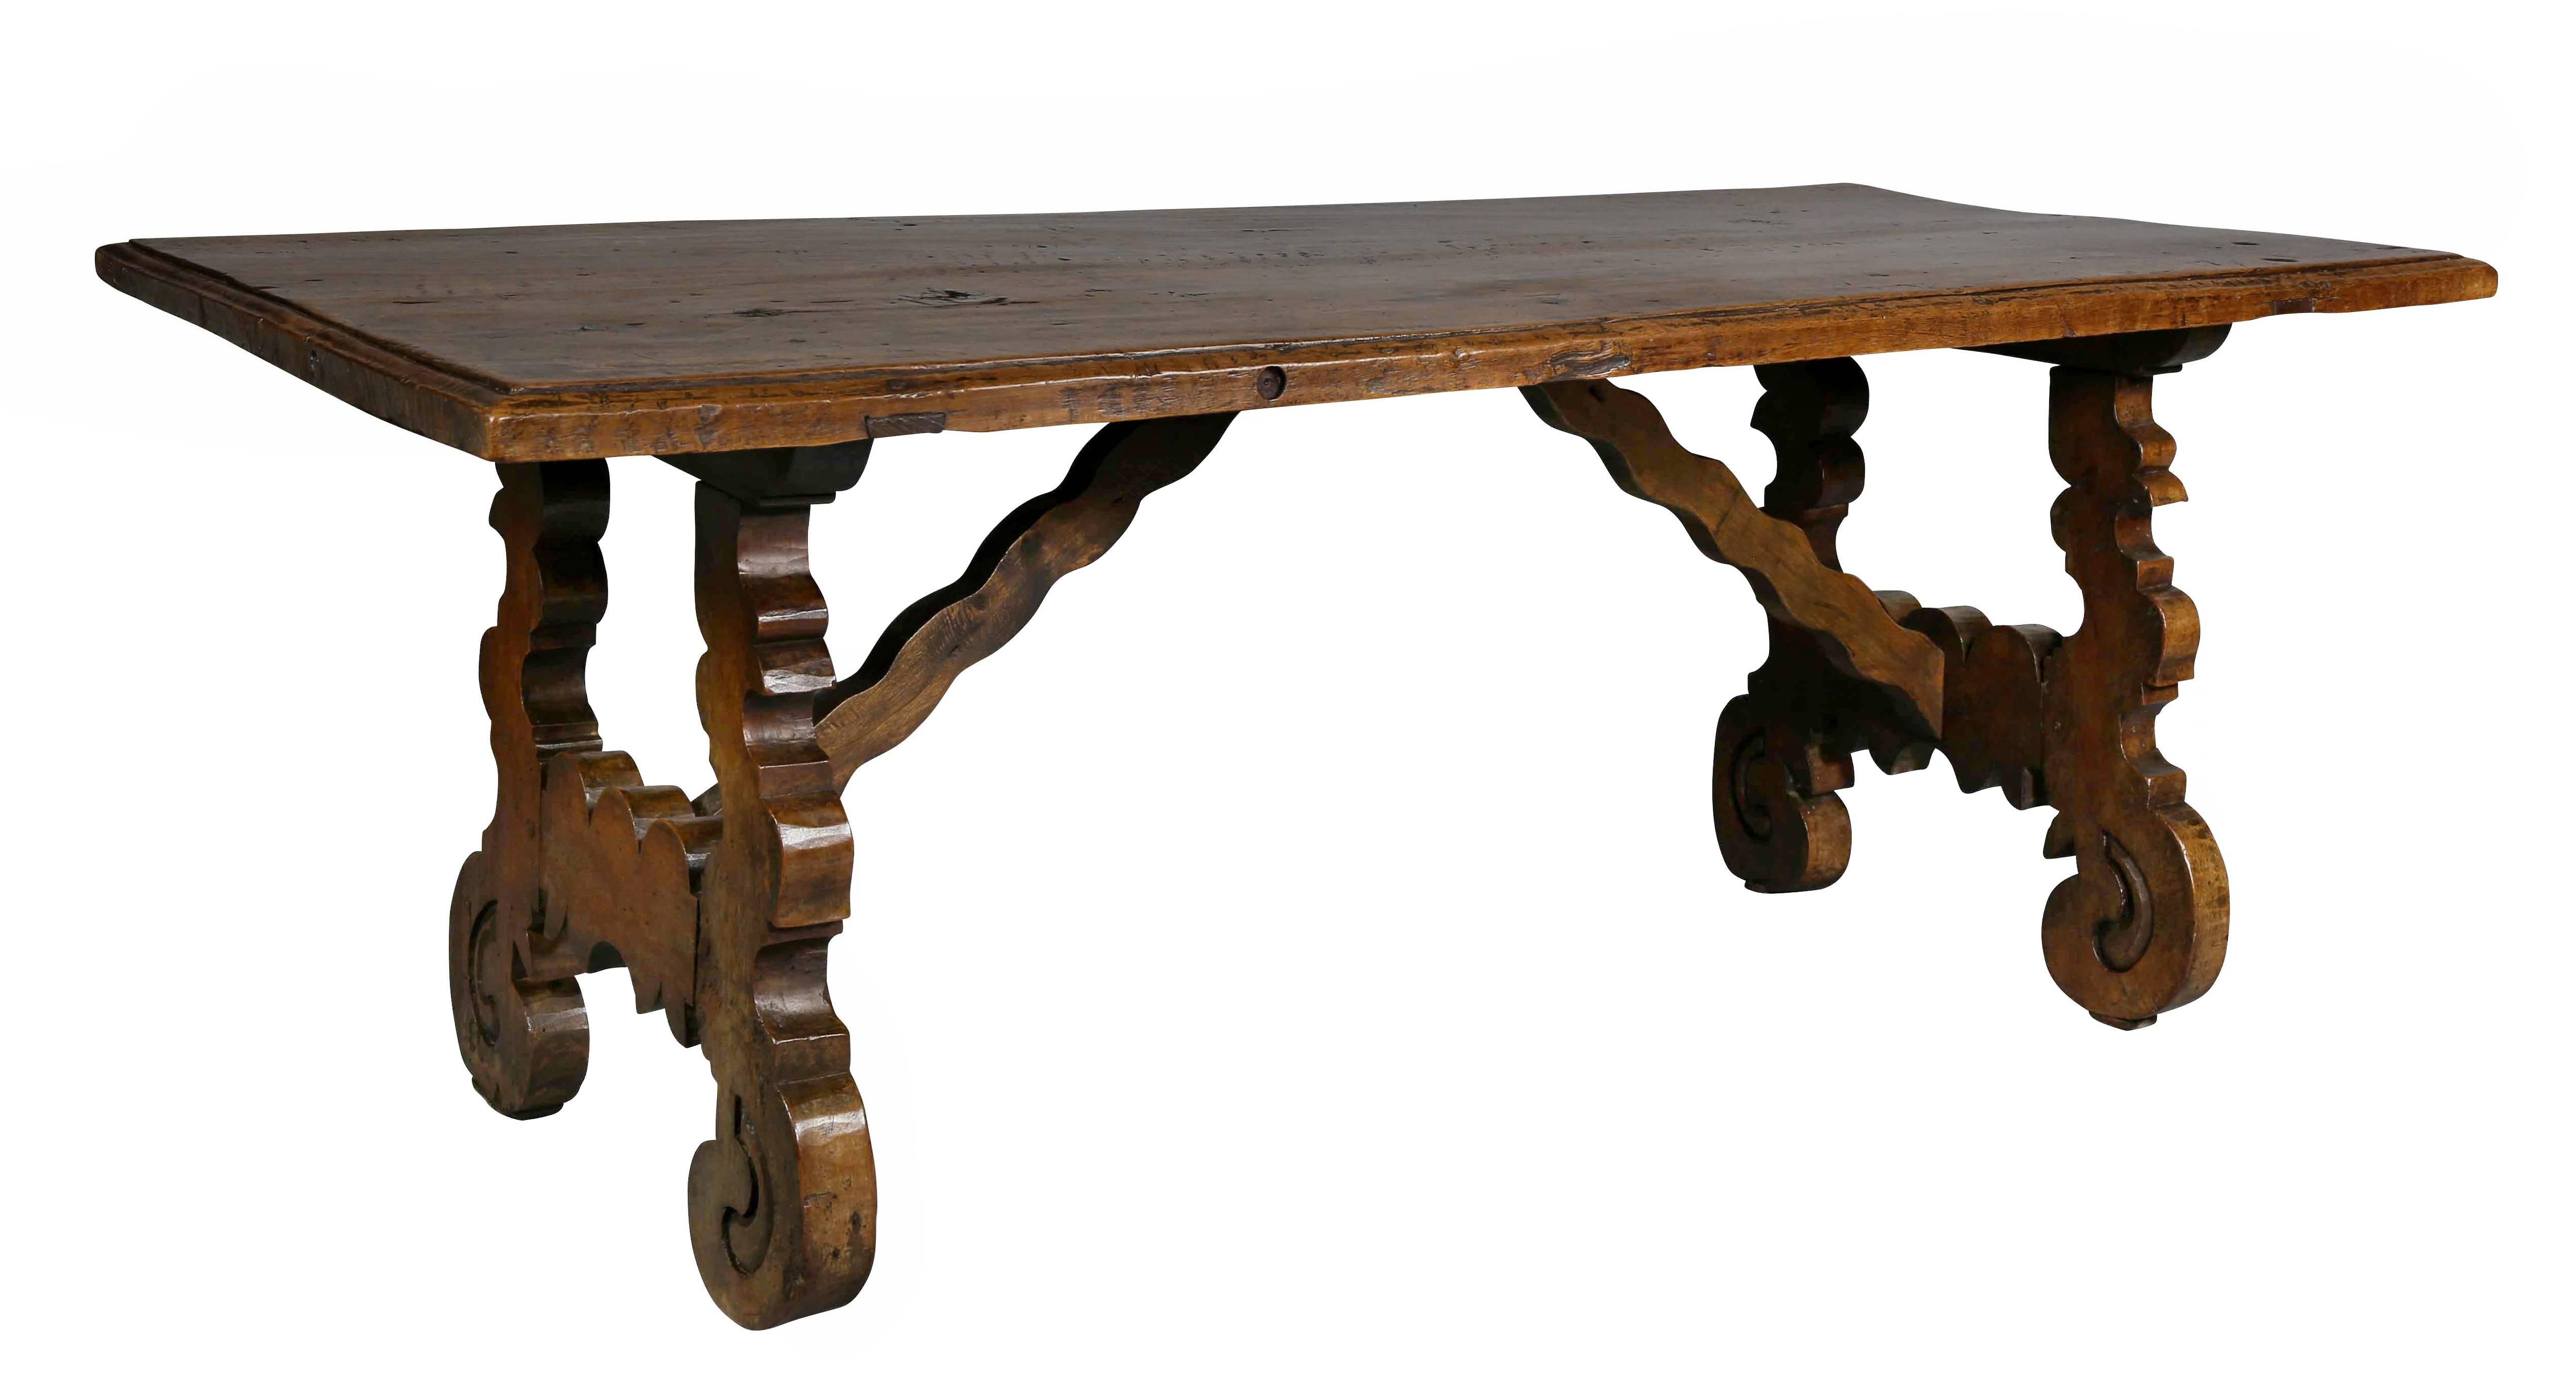 Rectangular top with "s" scroll form legs with wood stretcher.